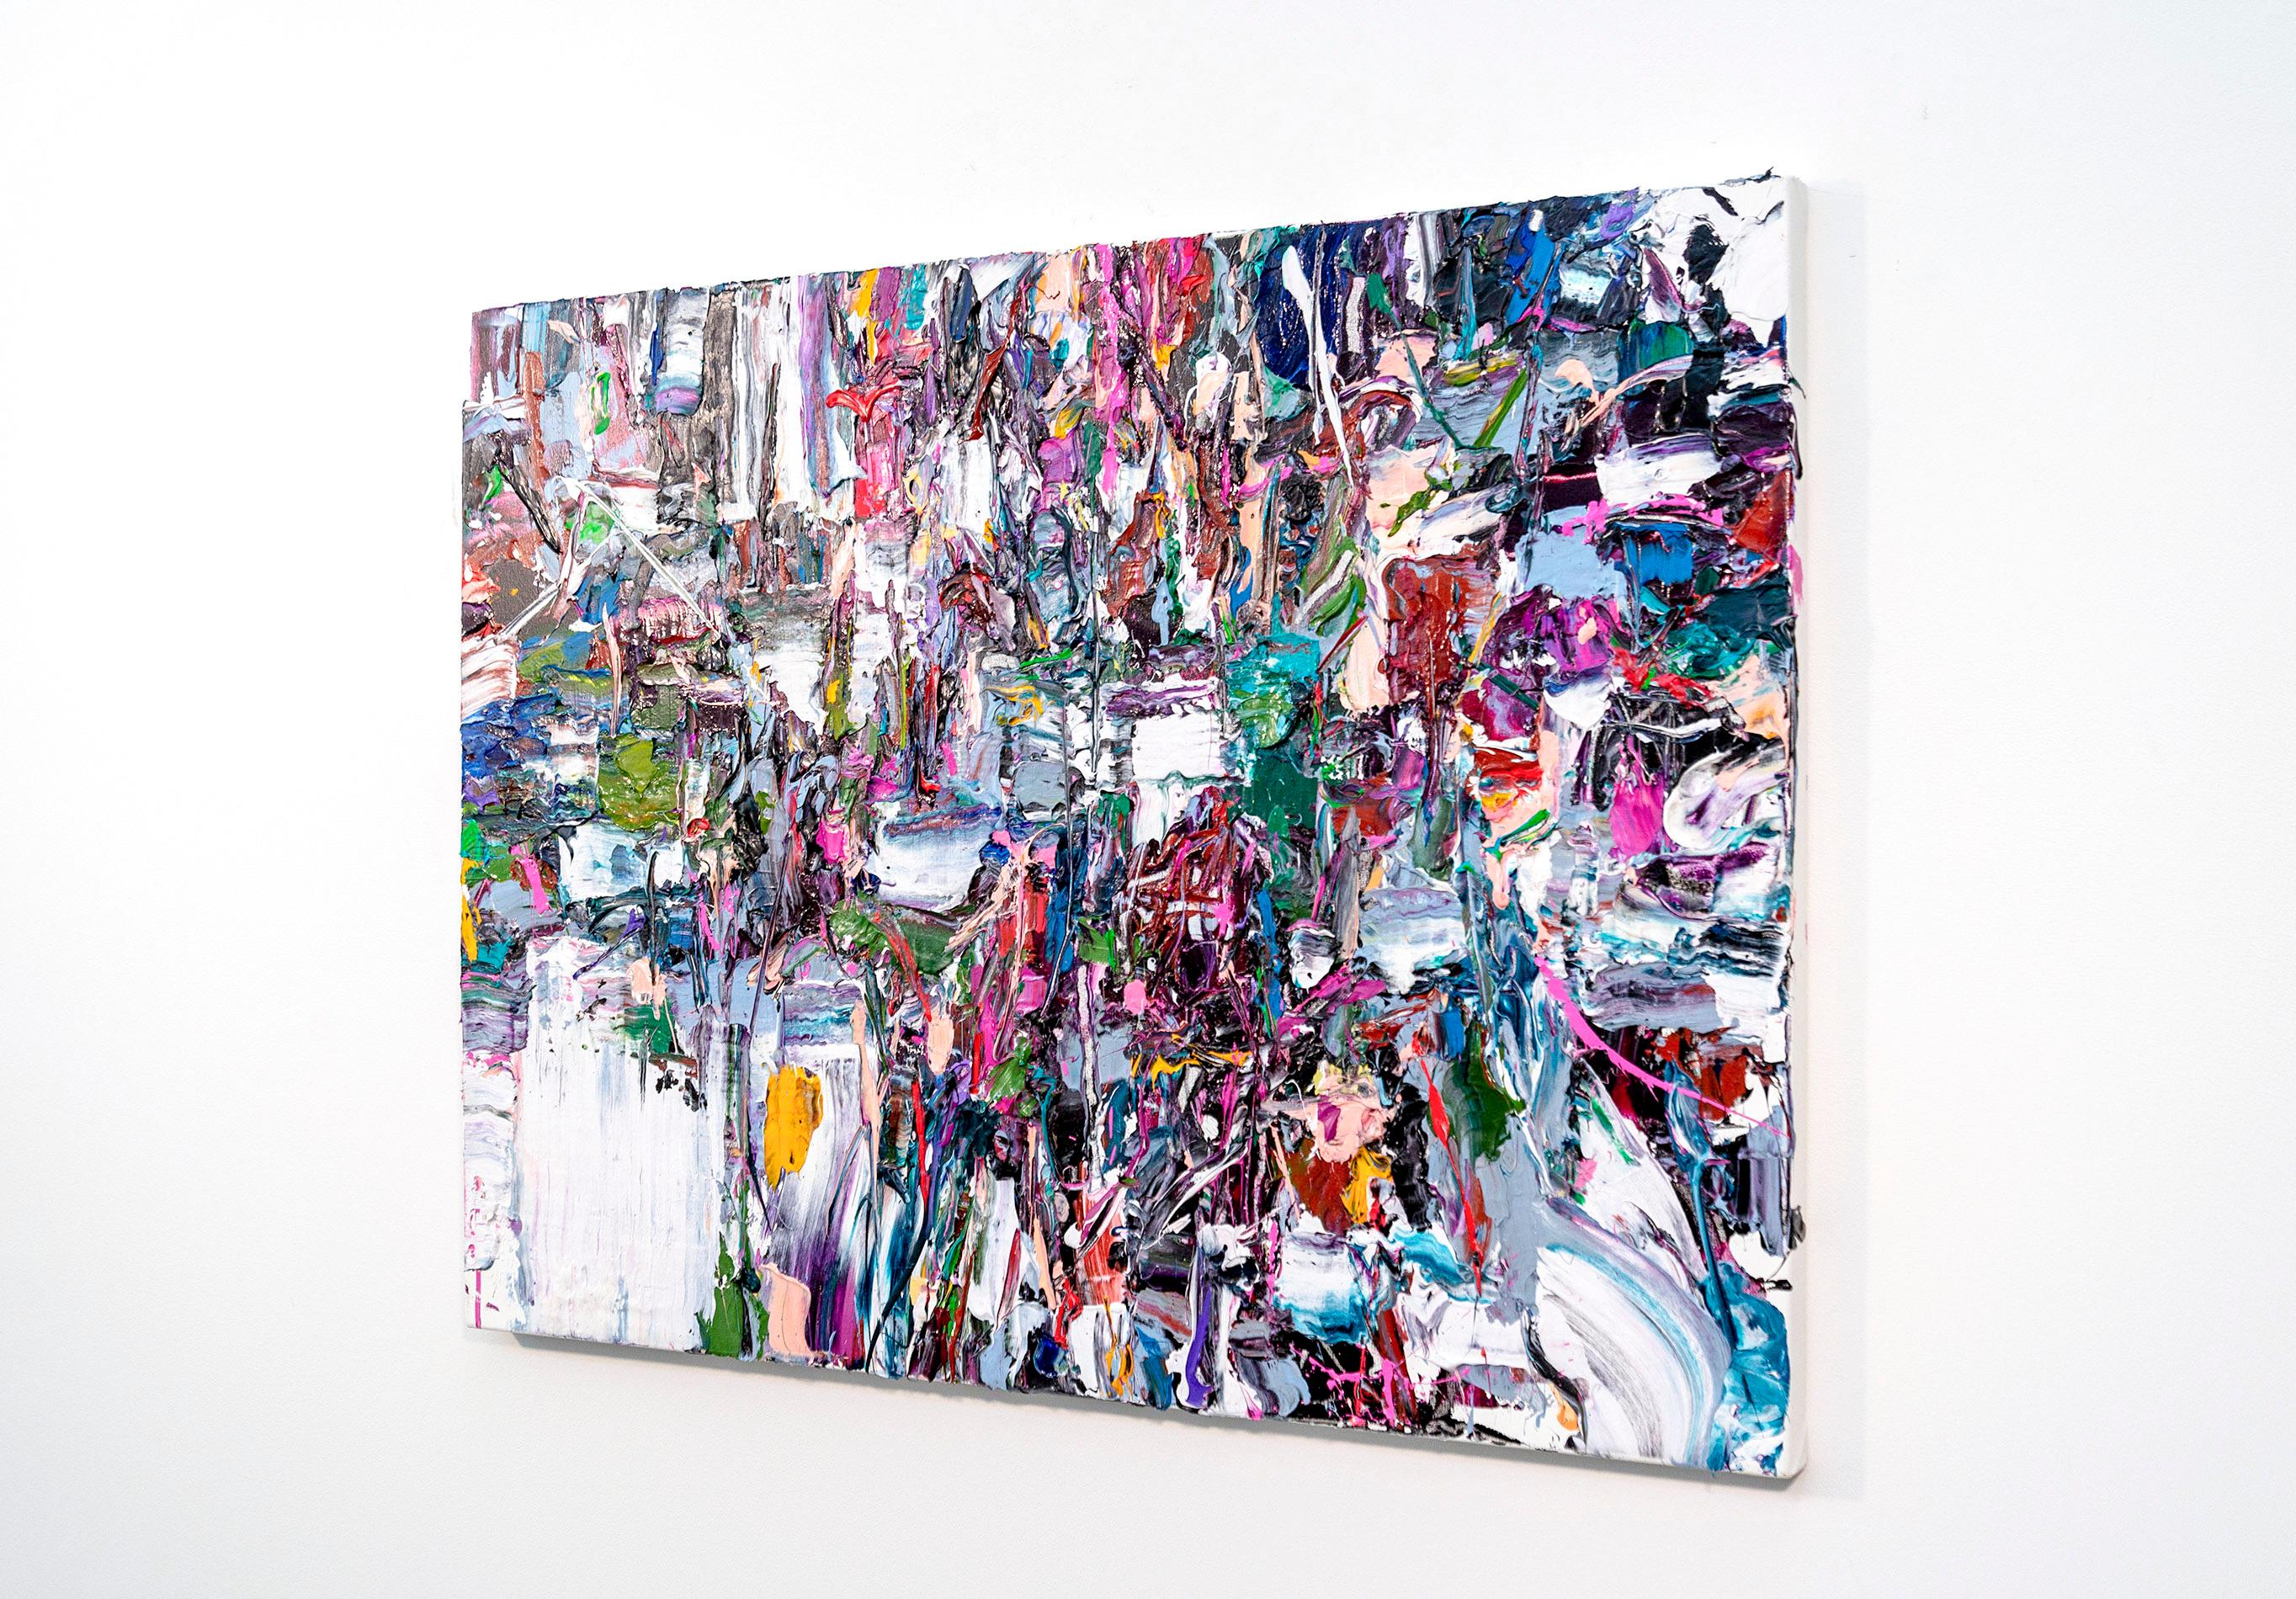 American artist Adam Cohen has an extraordinary sense of colour. His lush, expressive abstract paintings explode with a vivid colour palette. This piece is rendered in blues, greens, pinks, orange, red, gray, yellow, white and black. One noticeable